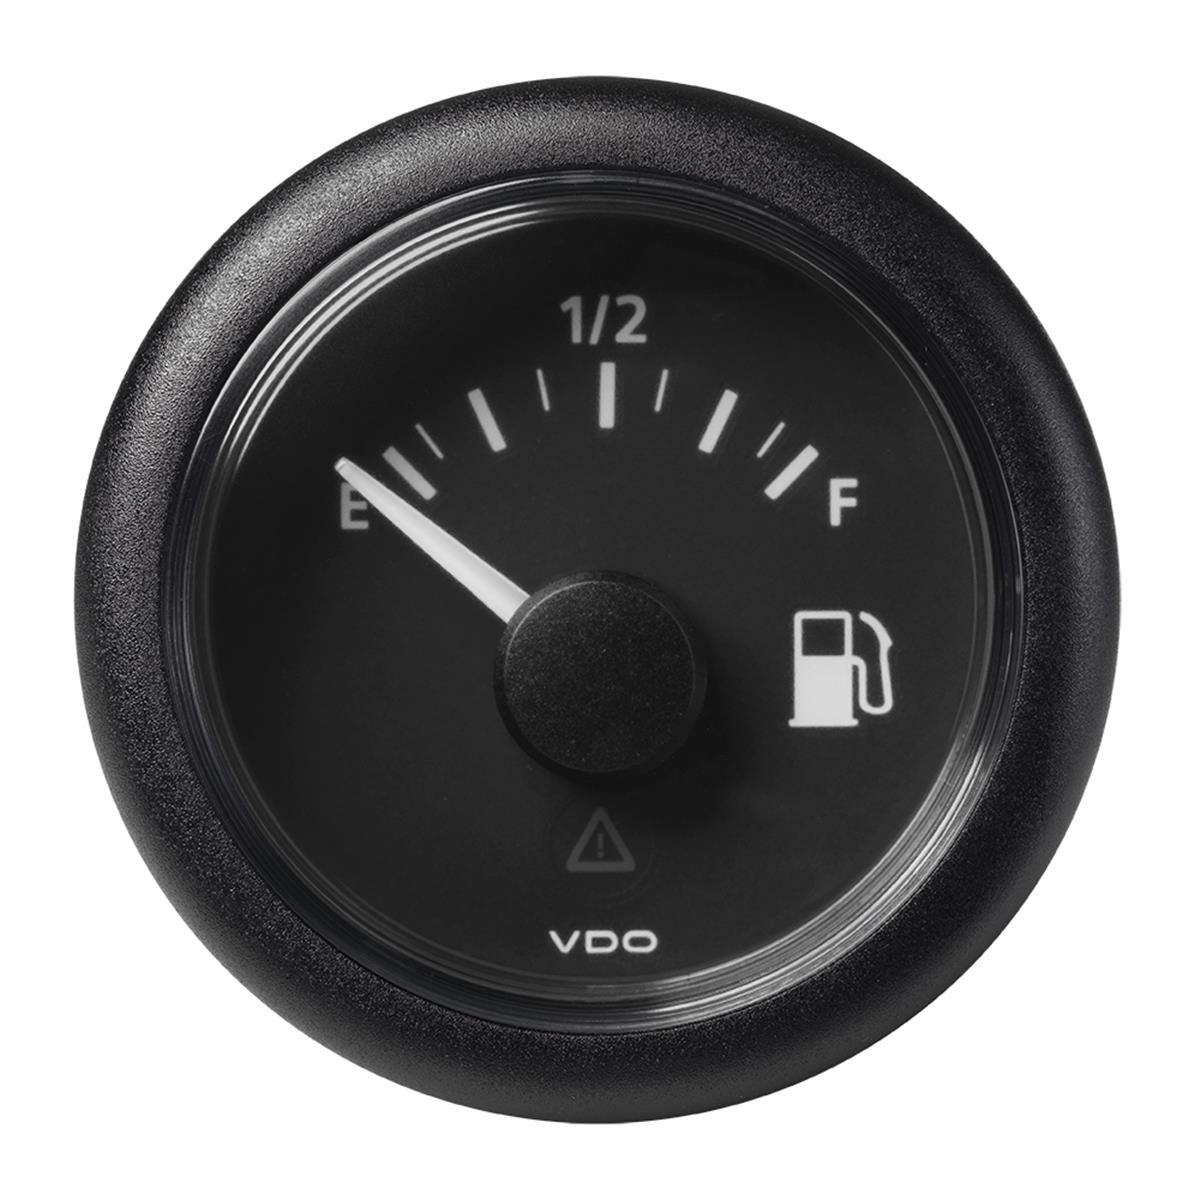 Picture of VDO Marine A2C59514094 2-.625 in. Viewline Fuel Level Empty & Full Gauge for 8-32V - 240-33.5 OHM - Black Dial & Round Bezel